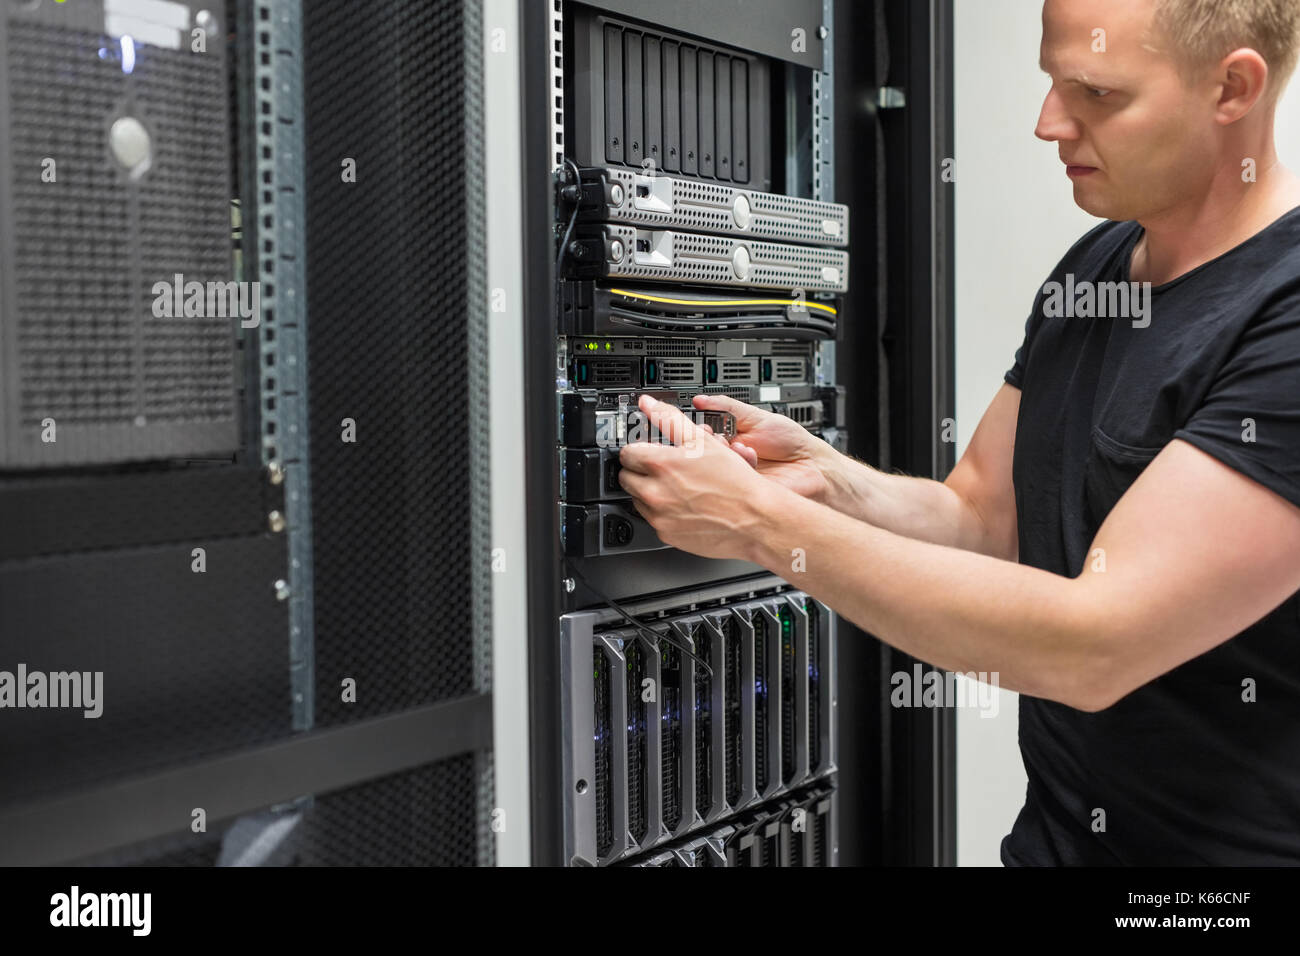 Male Technician Installing Hard Drive In Datacenter Stock Photo